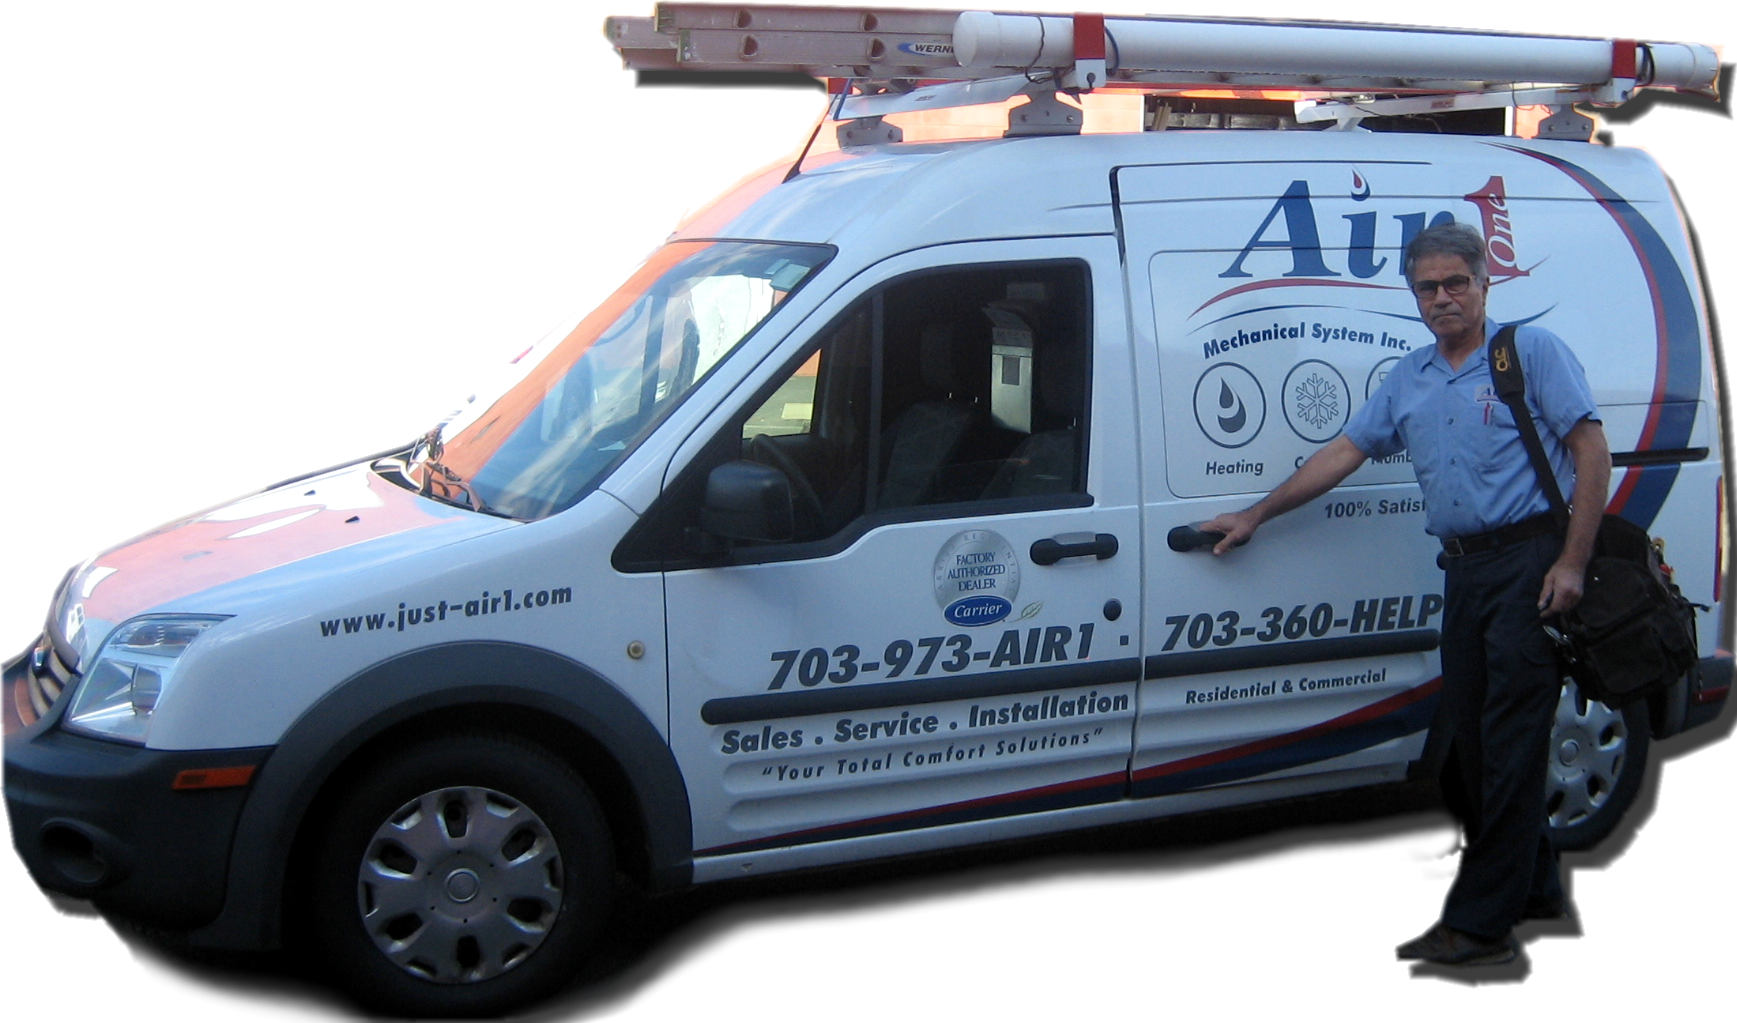 Air 1 Mechanical System reviews | 45710 Oakbrook Ct - Sterling VA